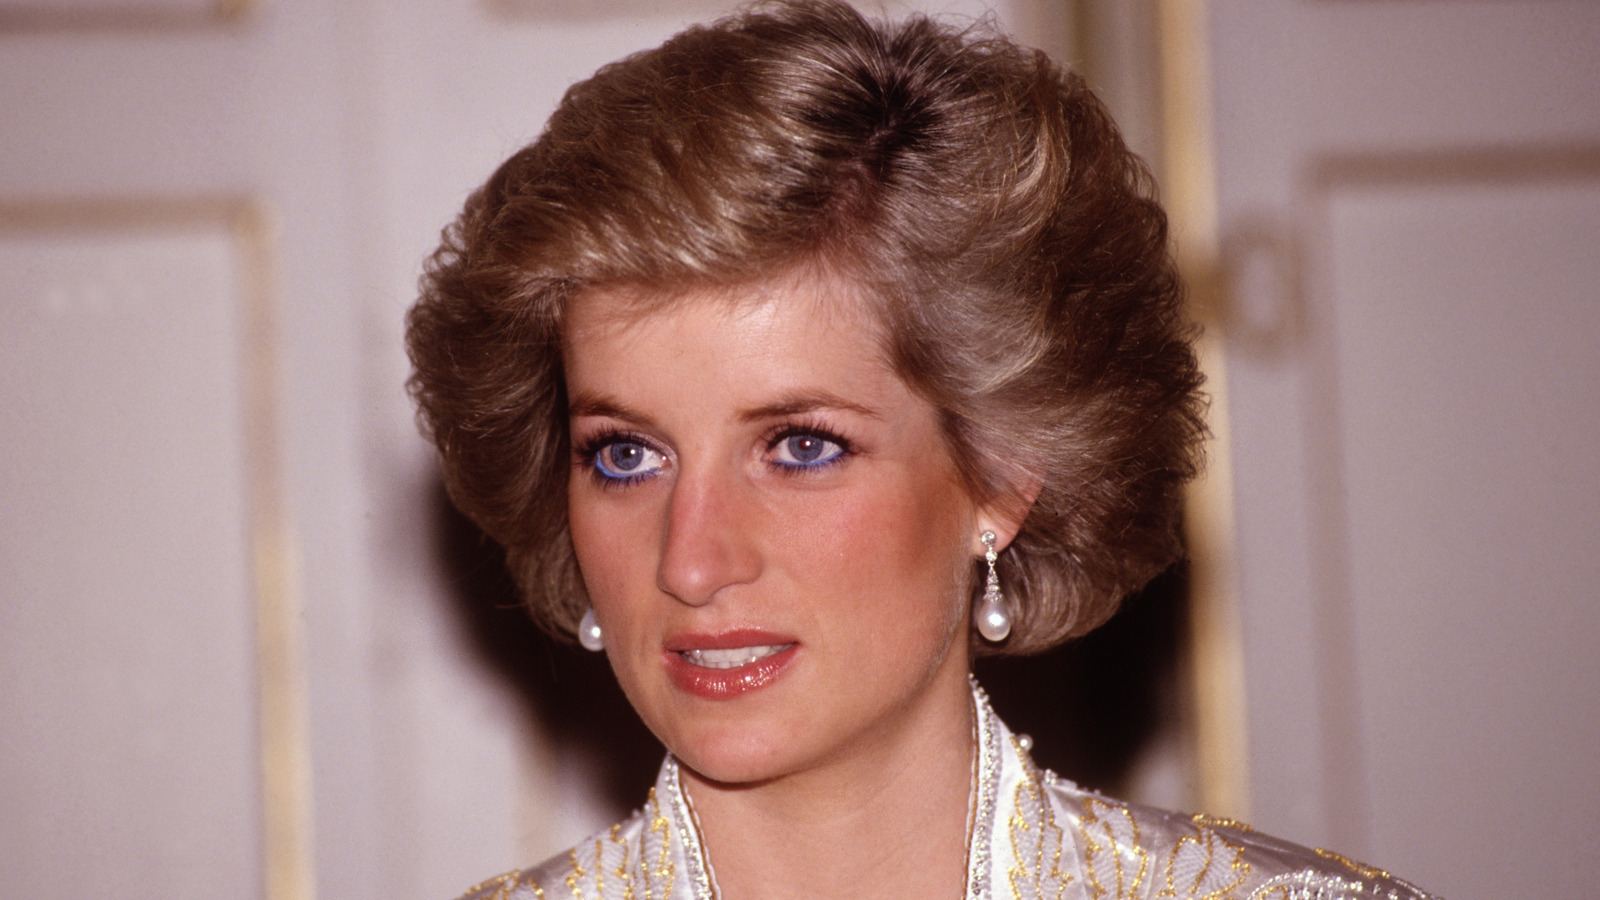 Did Donald Trump Want To Date Princess Diana After Her Divorce